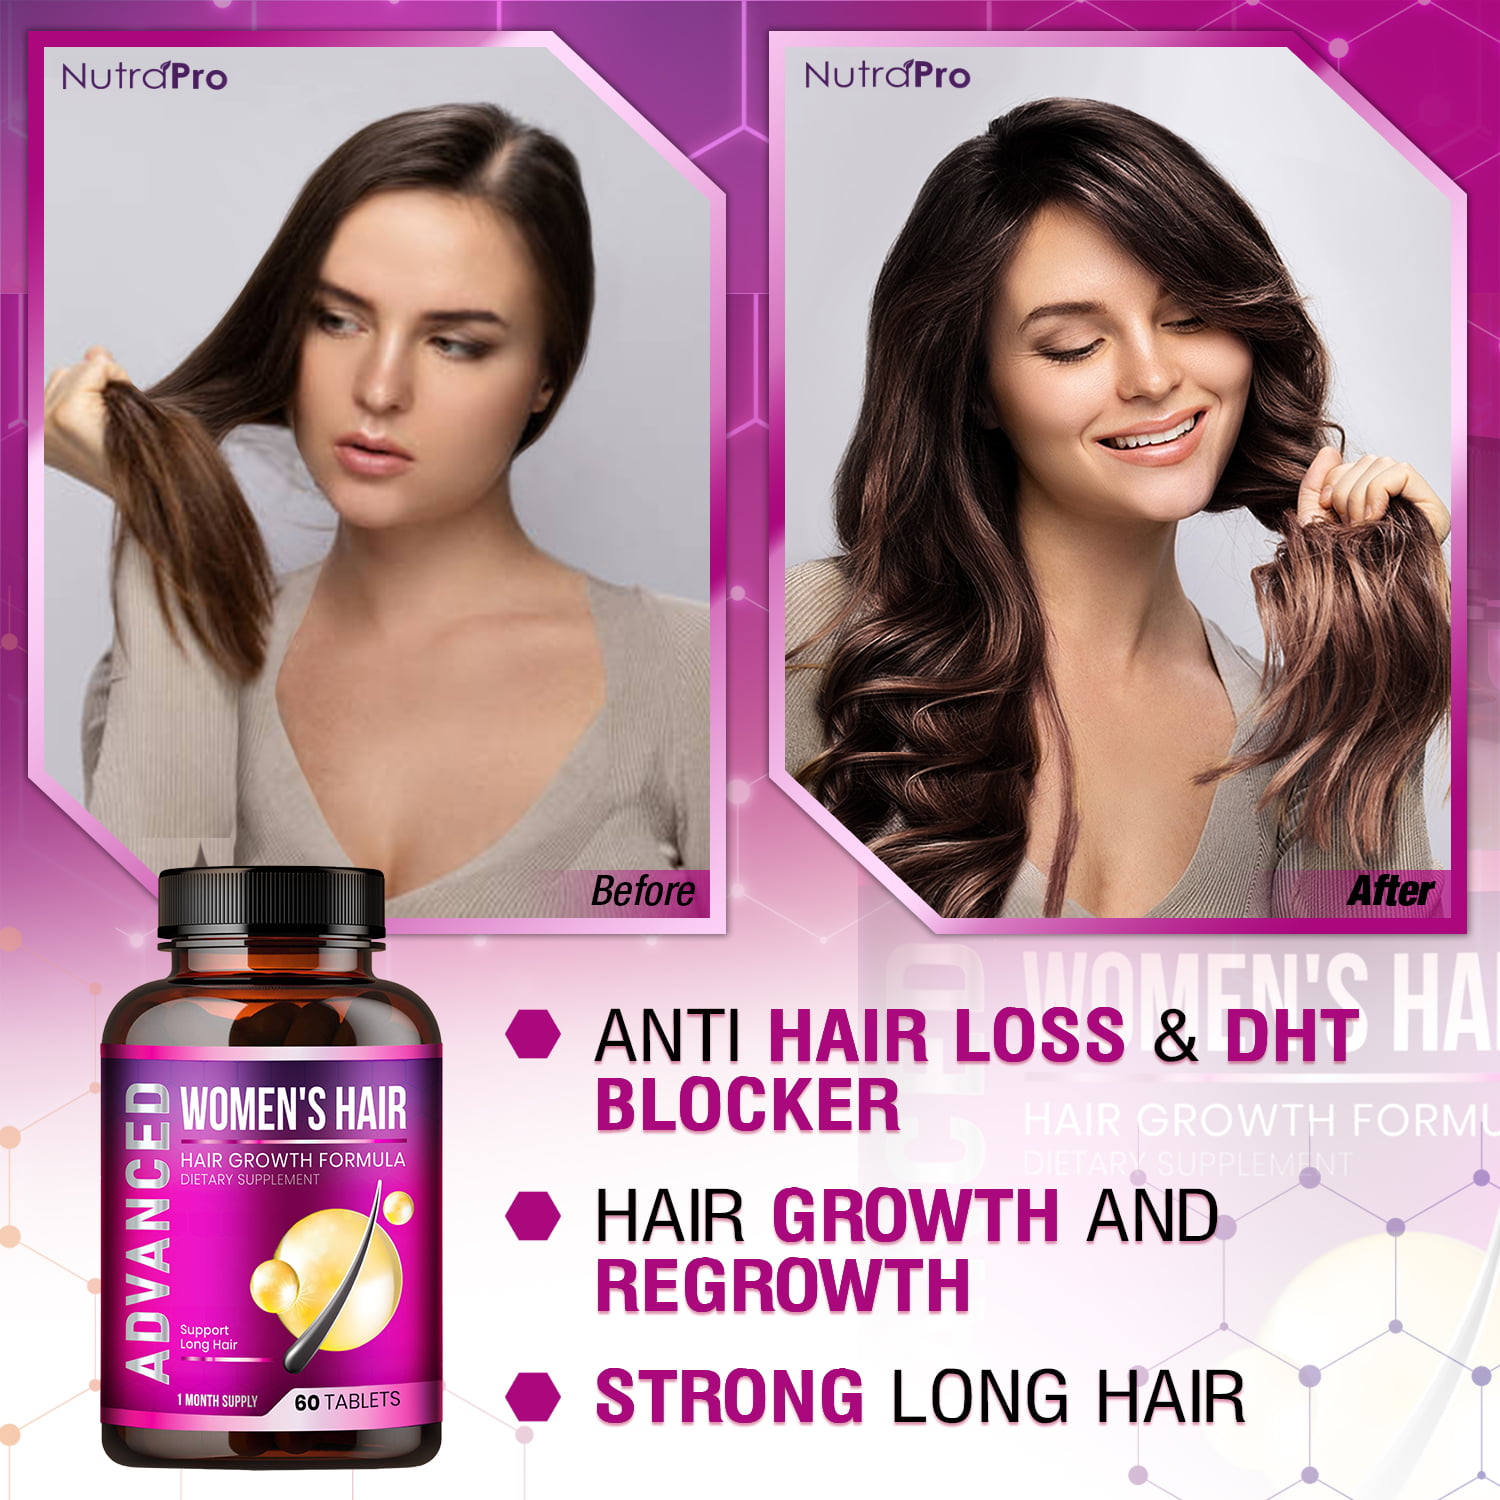 10 Best Vitamins and Supplements For Thick Hair Growth | Care/of